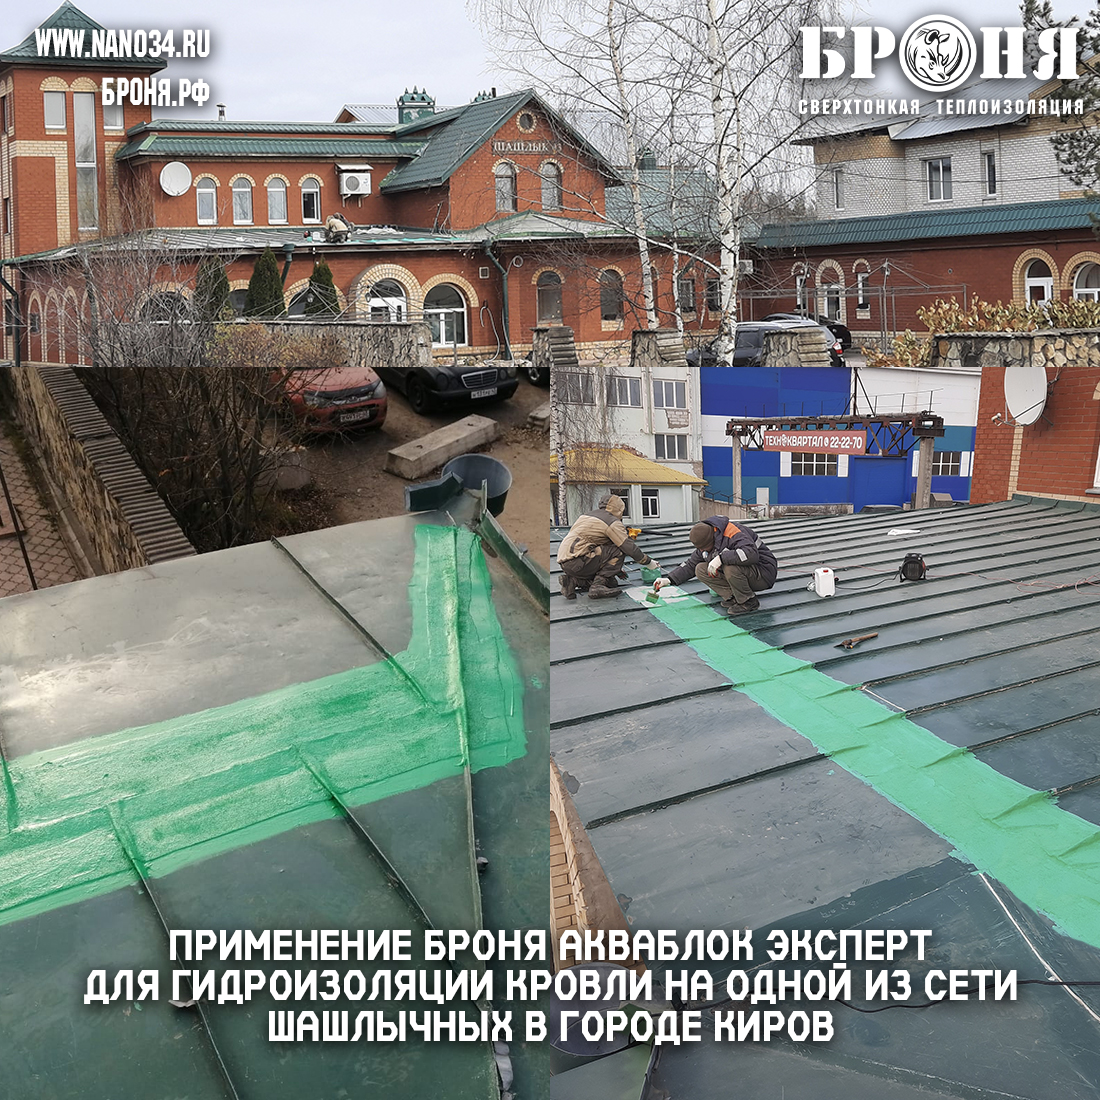 Application of Bronya Aquablock Expert for waterproofing the roof on one of the network of kebabs in the city of Kirov (photo and video with dealer comments)